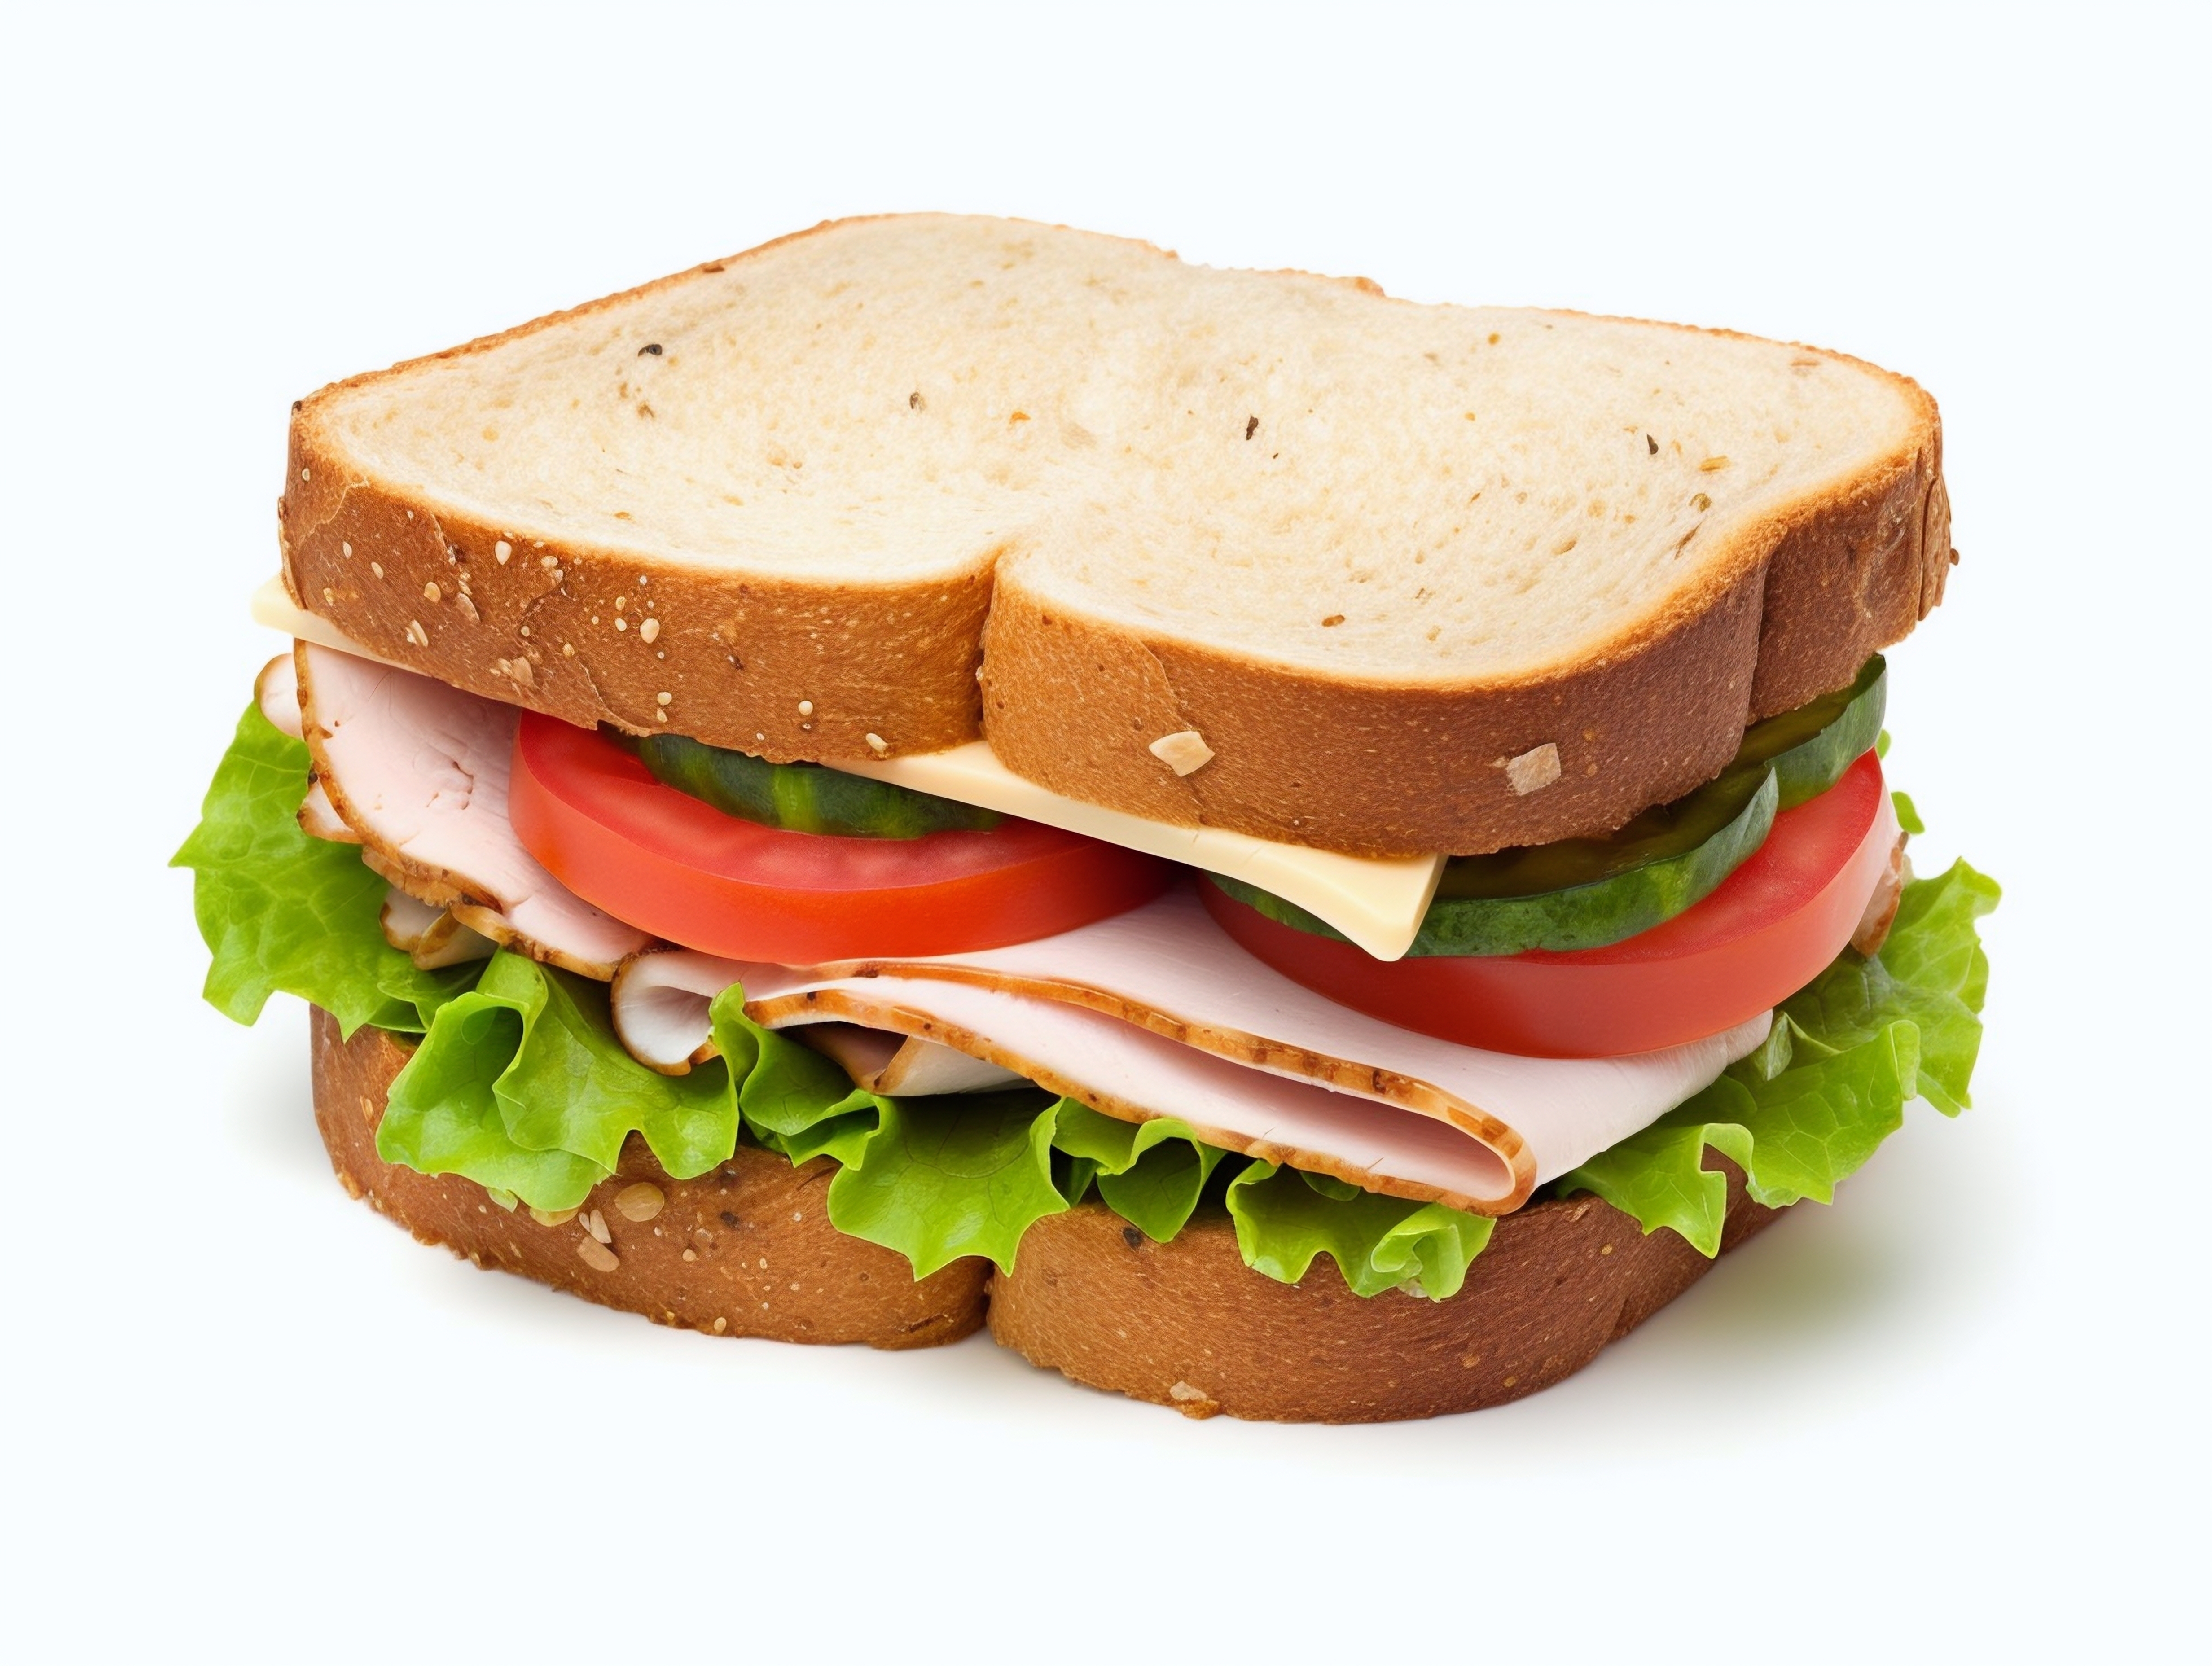 A ham, cheese, tomato, and cucumber sandwich | Source: Shutterstock